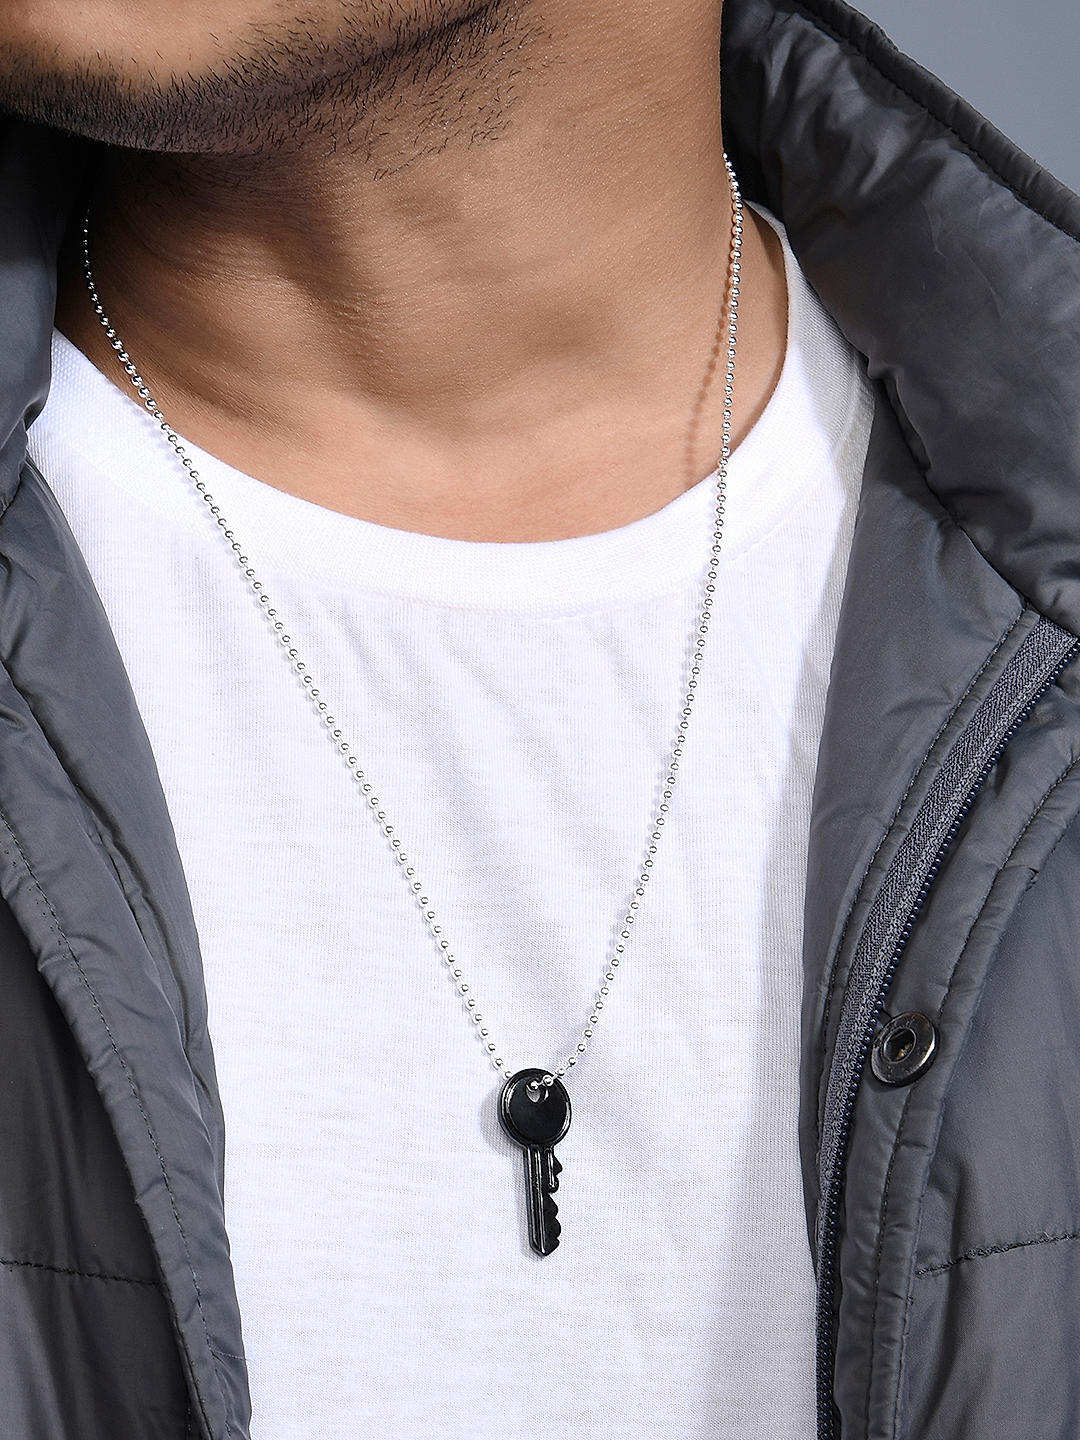 Buy Ringzanio Black Colour Twisted Long Bar Pendant For Mens & Boys Trendy  Simple Chain Pendant For Mens and Boys. at Amazon.in